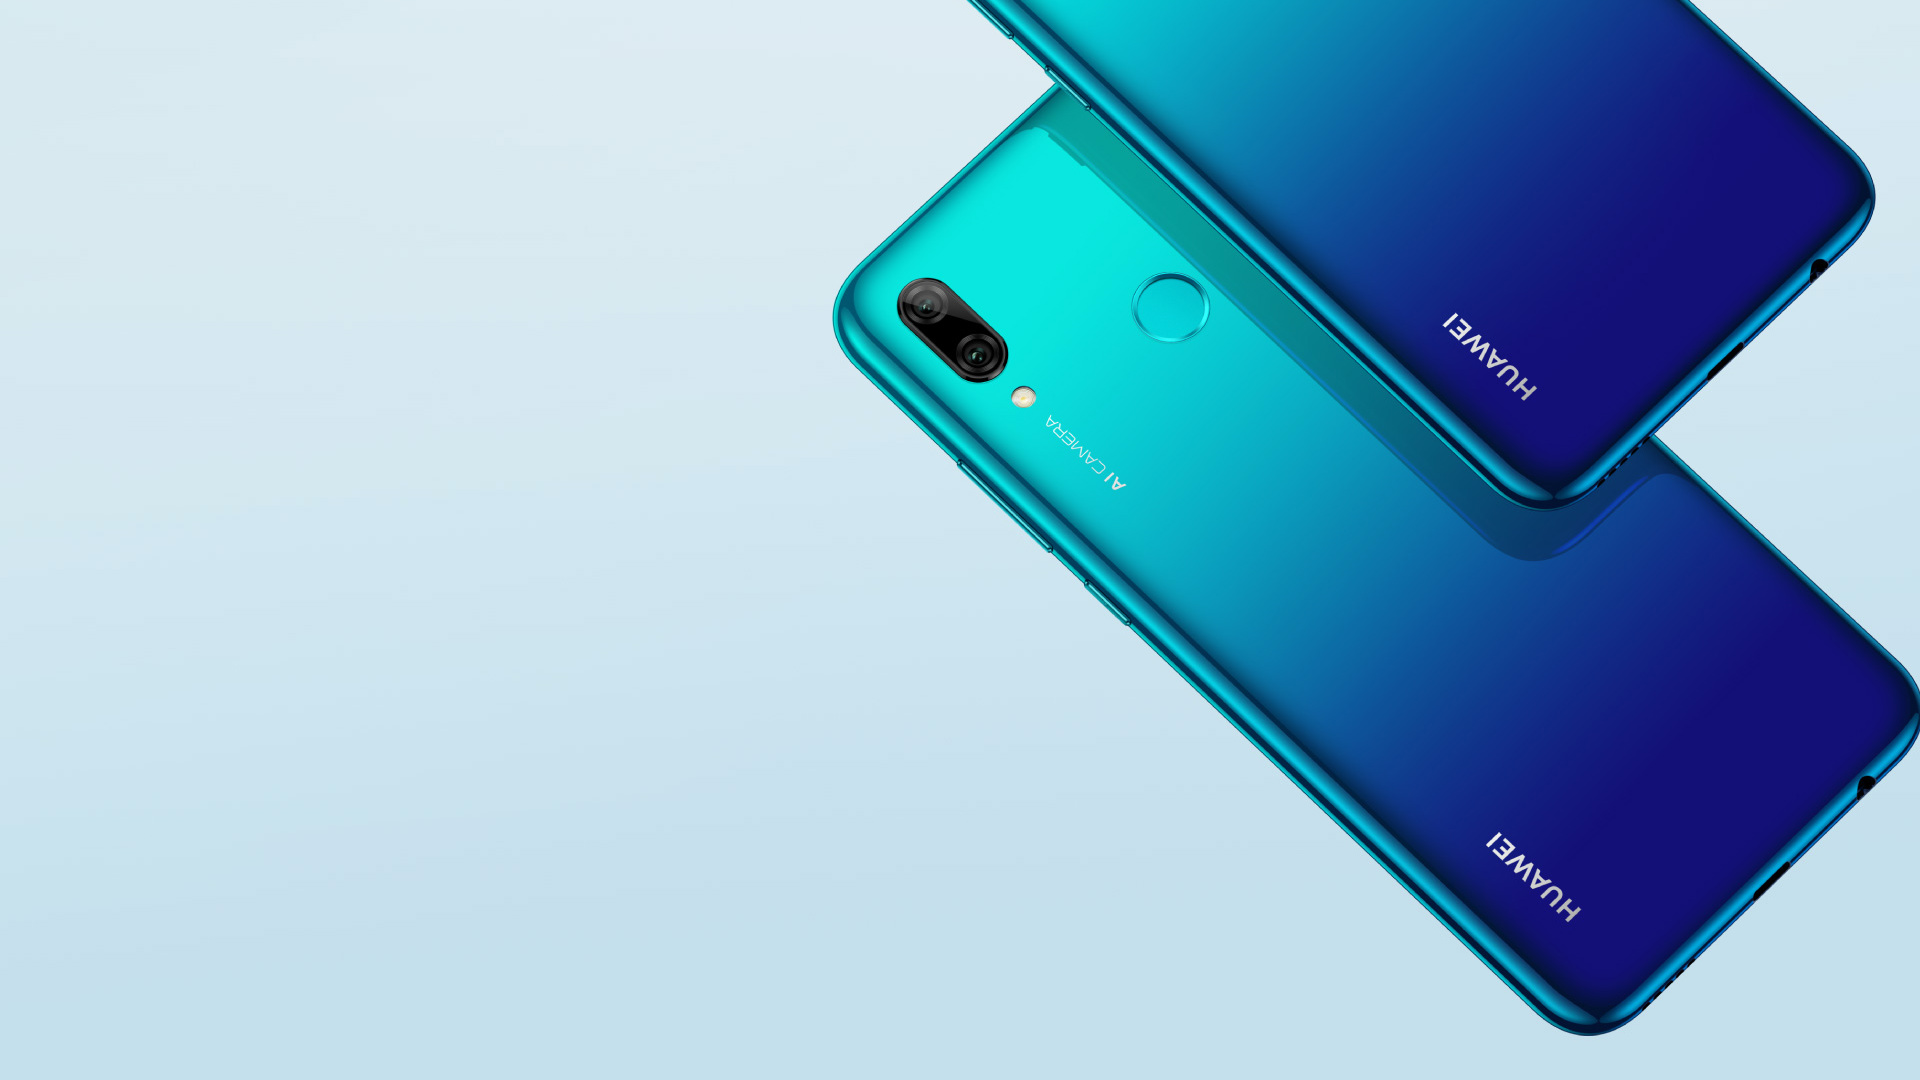 Huawei P Smart (2019): Specs, features, availability - Android 